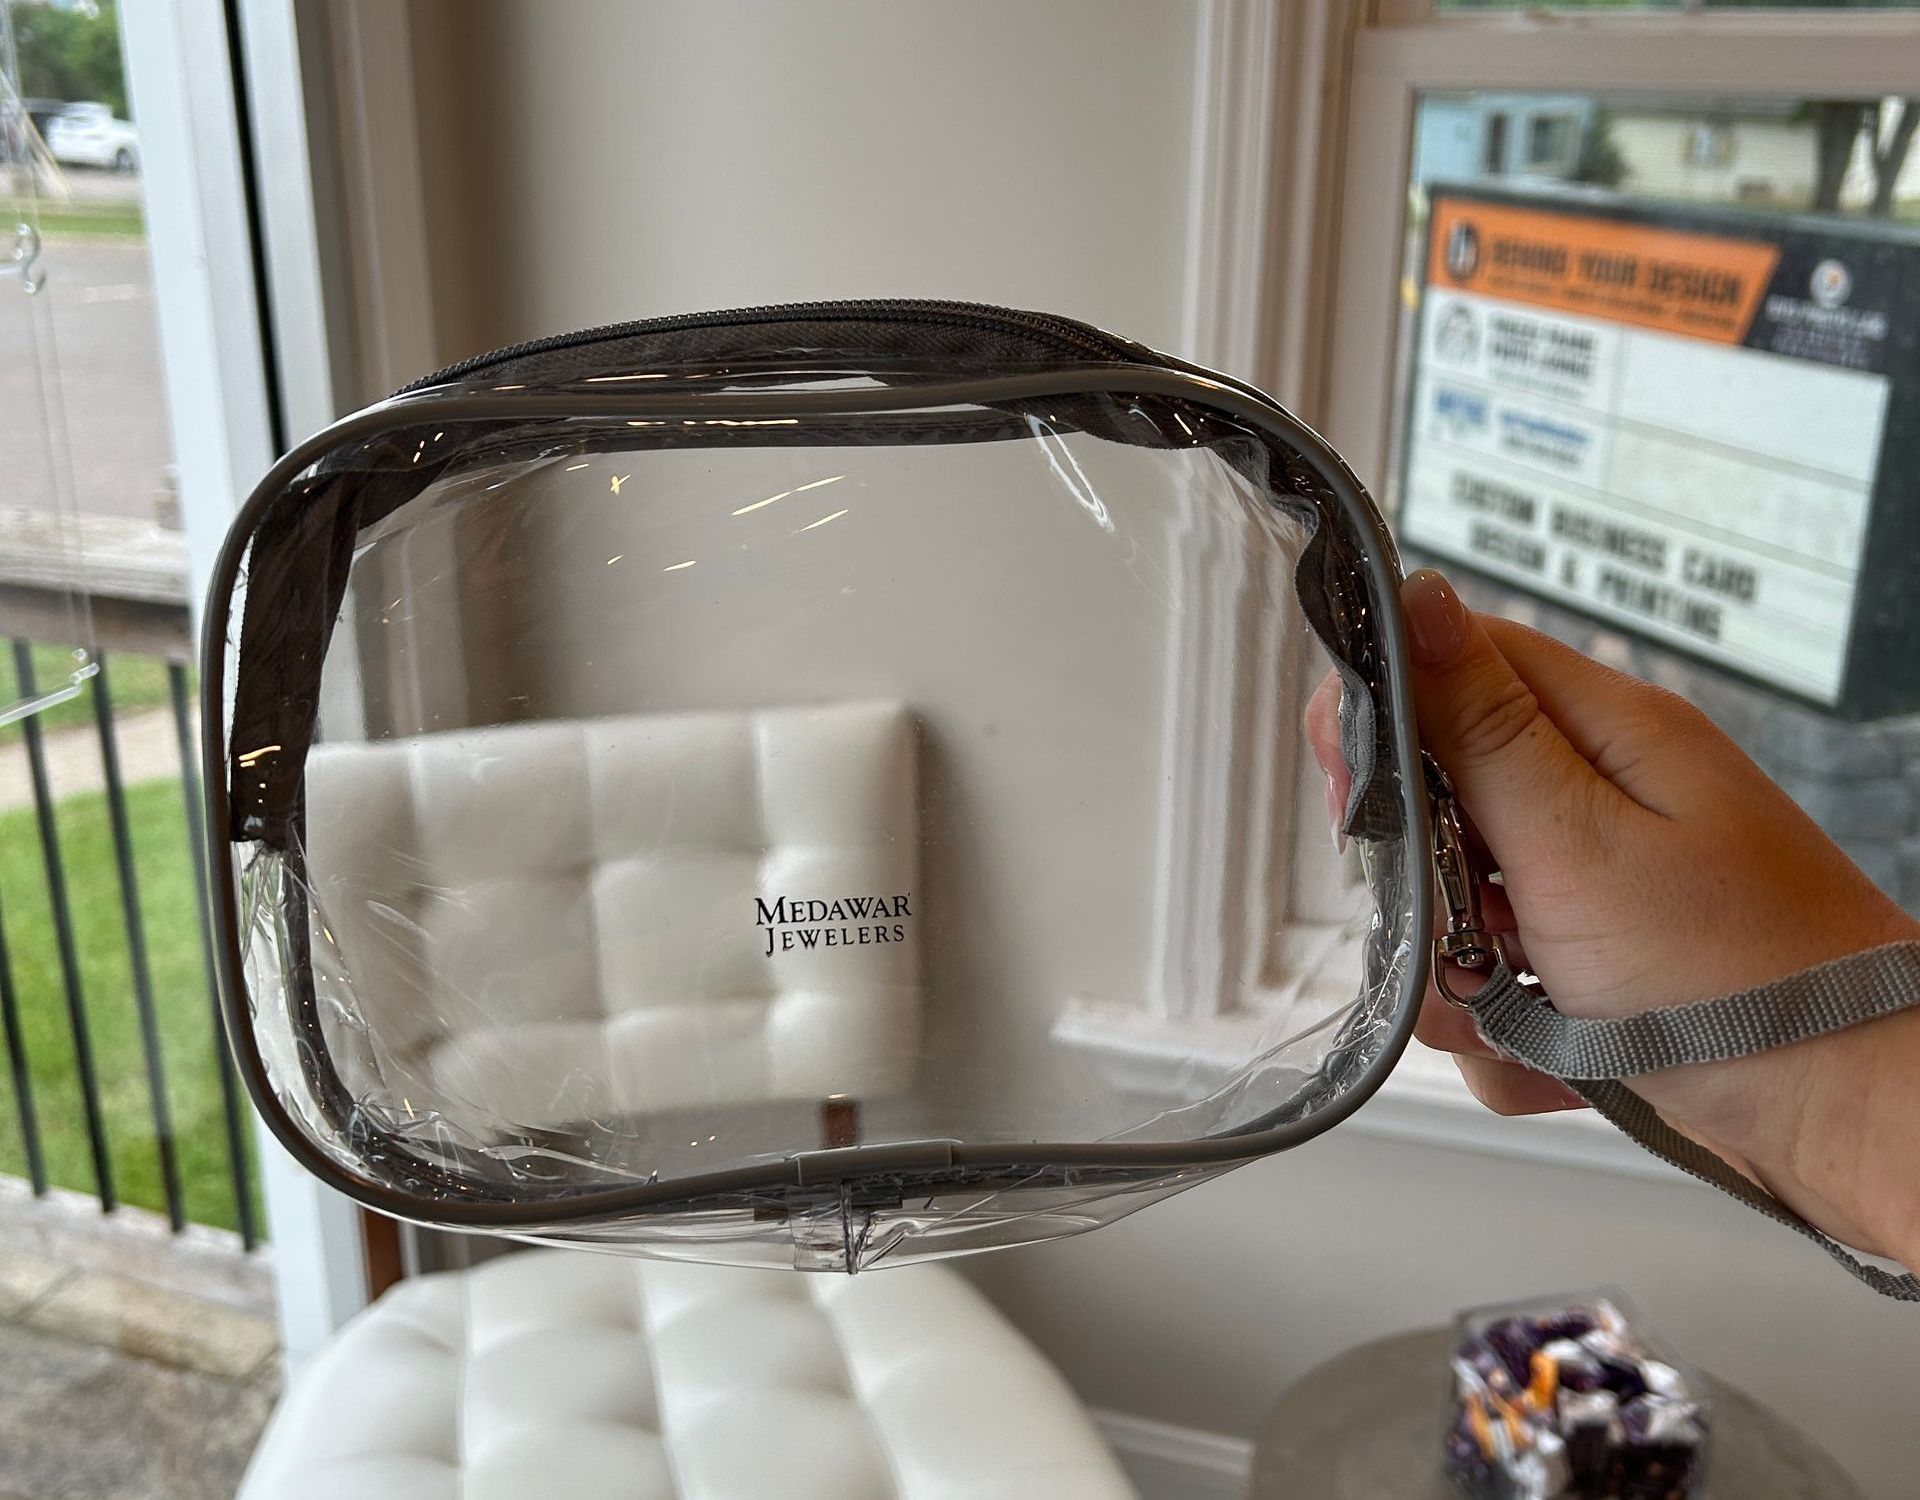 photo of a clear pouch with the Medawar Jewelers logo on it